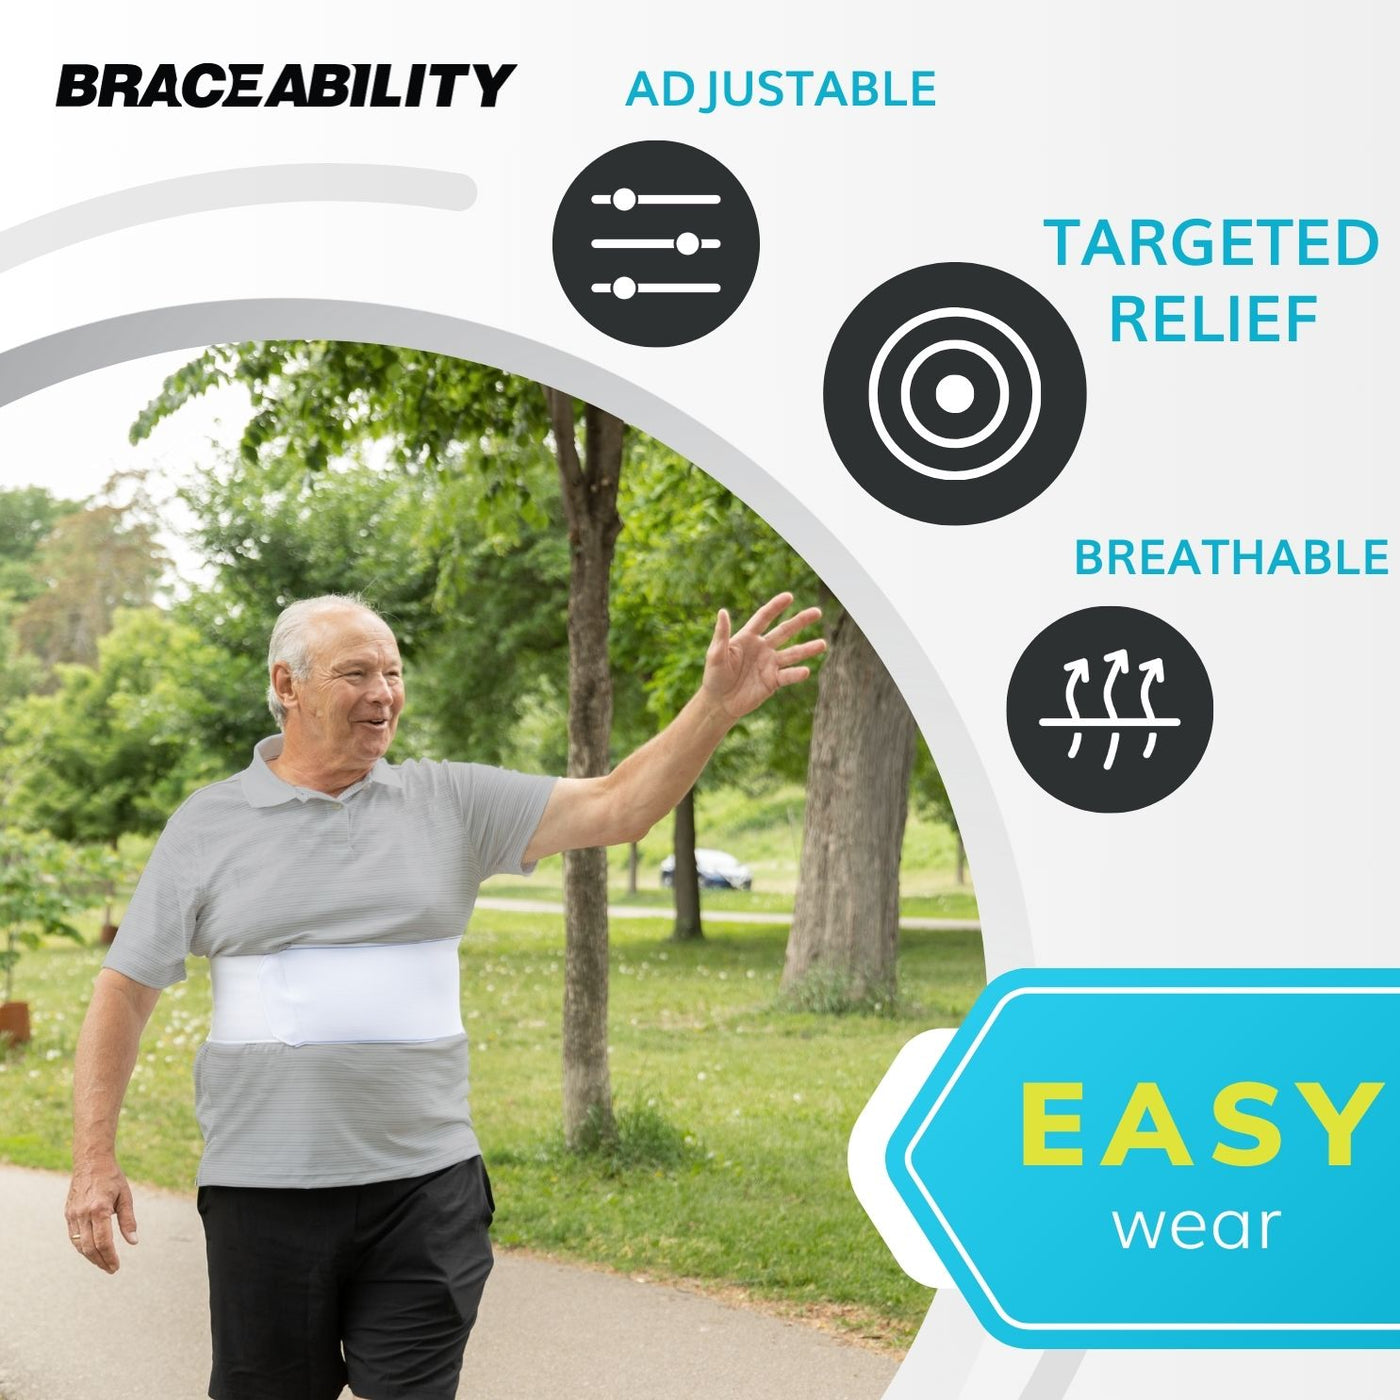 The braceability chest binder has an adjustable fastener to provide targeted relief to rib injuries